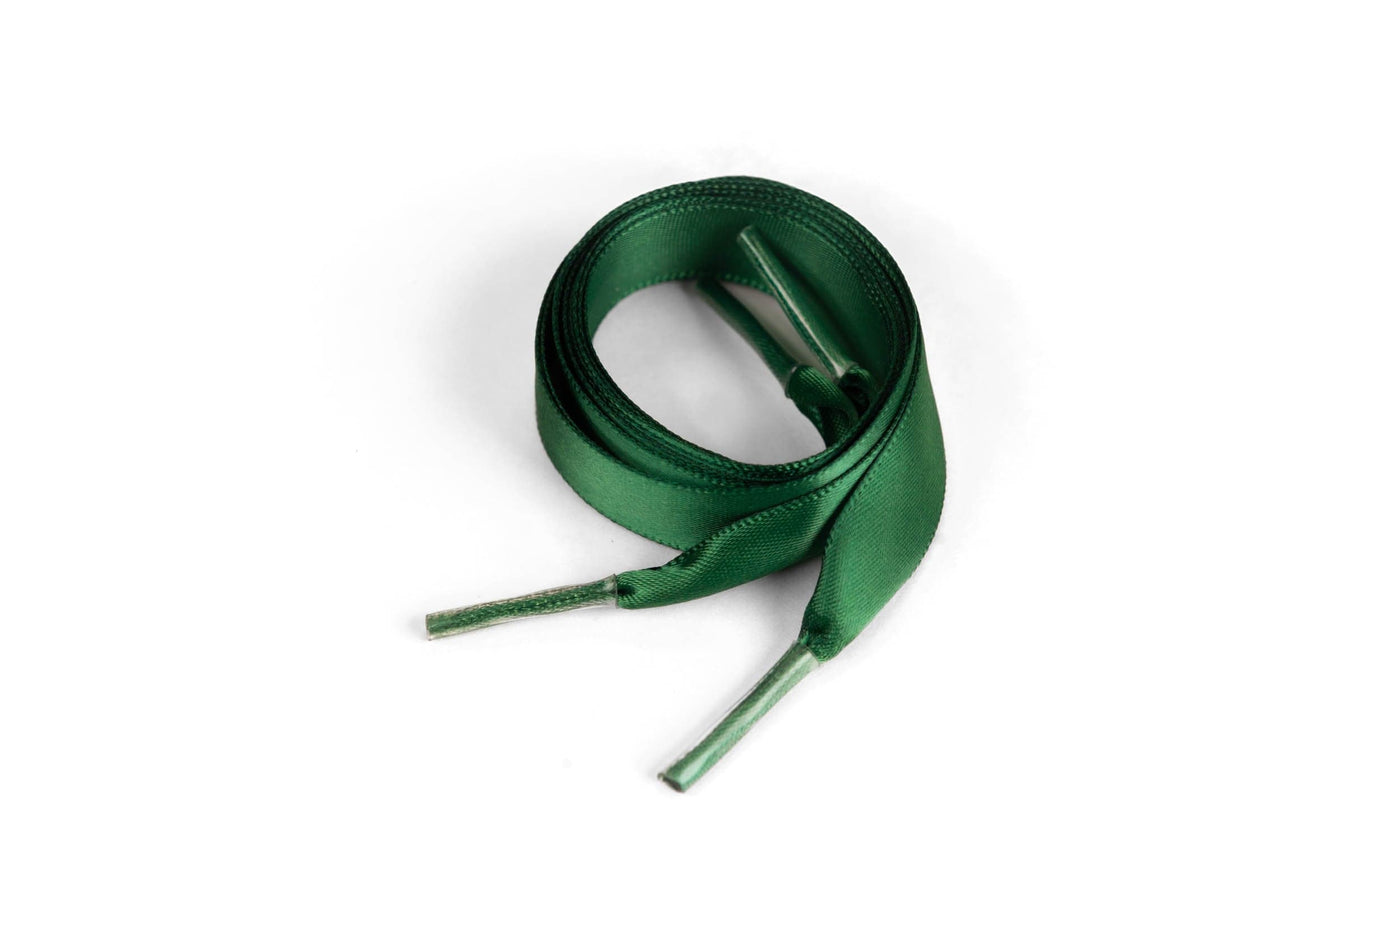 Satin Ribbon 5/8" Premium Quality Shoelaces - 96" Inch Length Forest Green